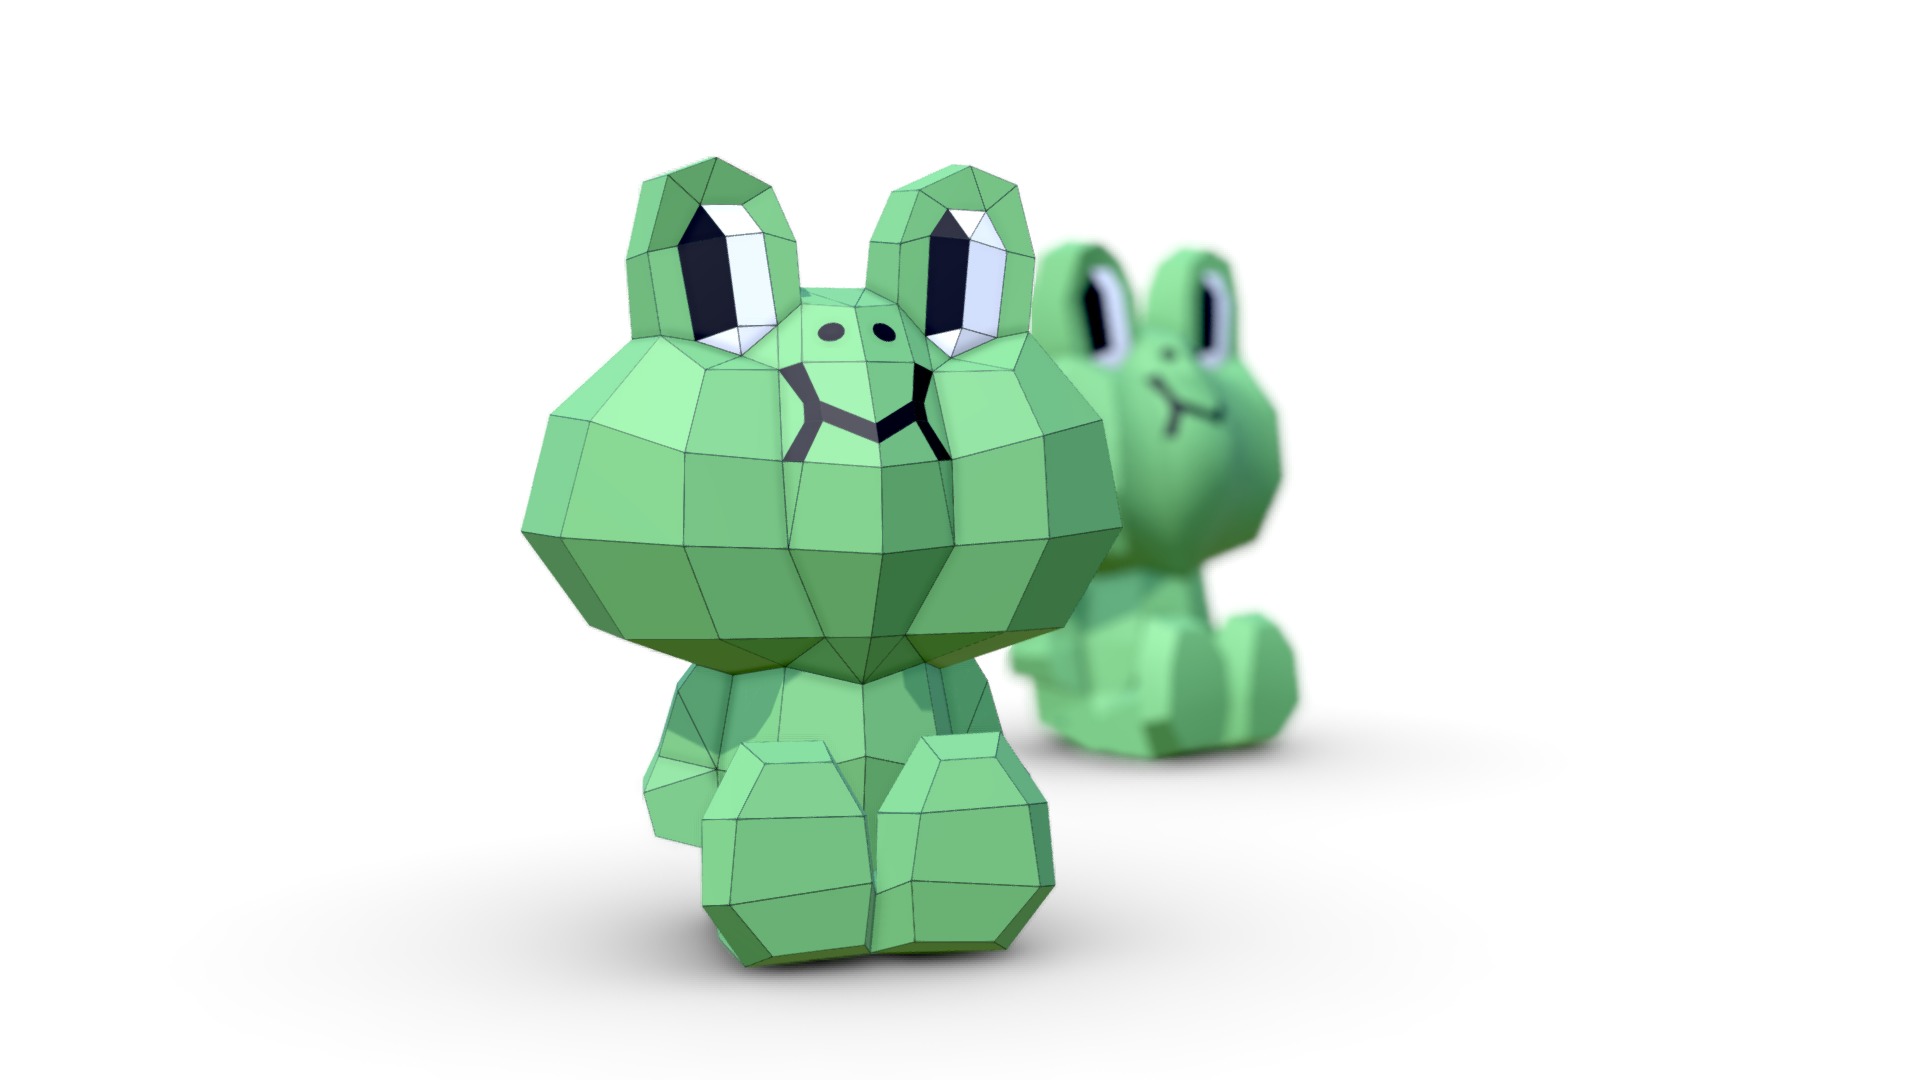 3D model Frog Leonardo - This is a 3D model of the Frog Leonardo. The 3D model is about a green toy figure.